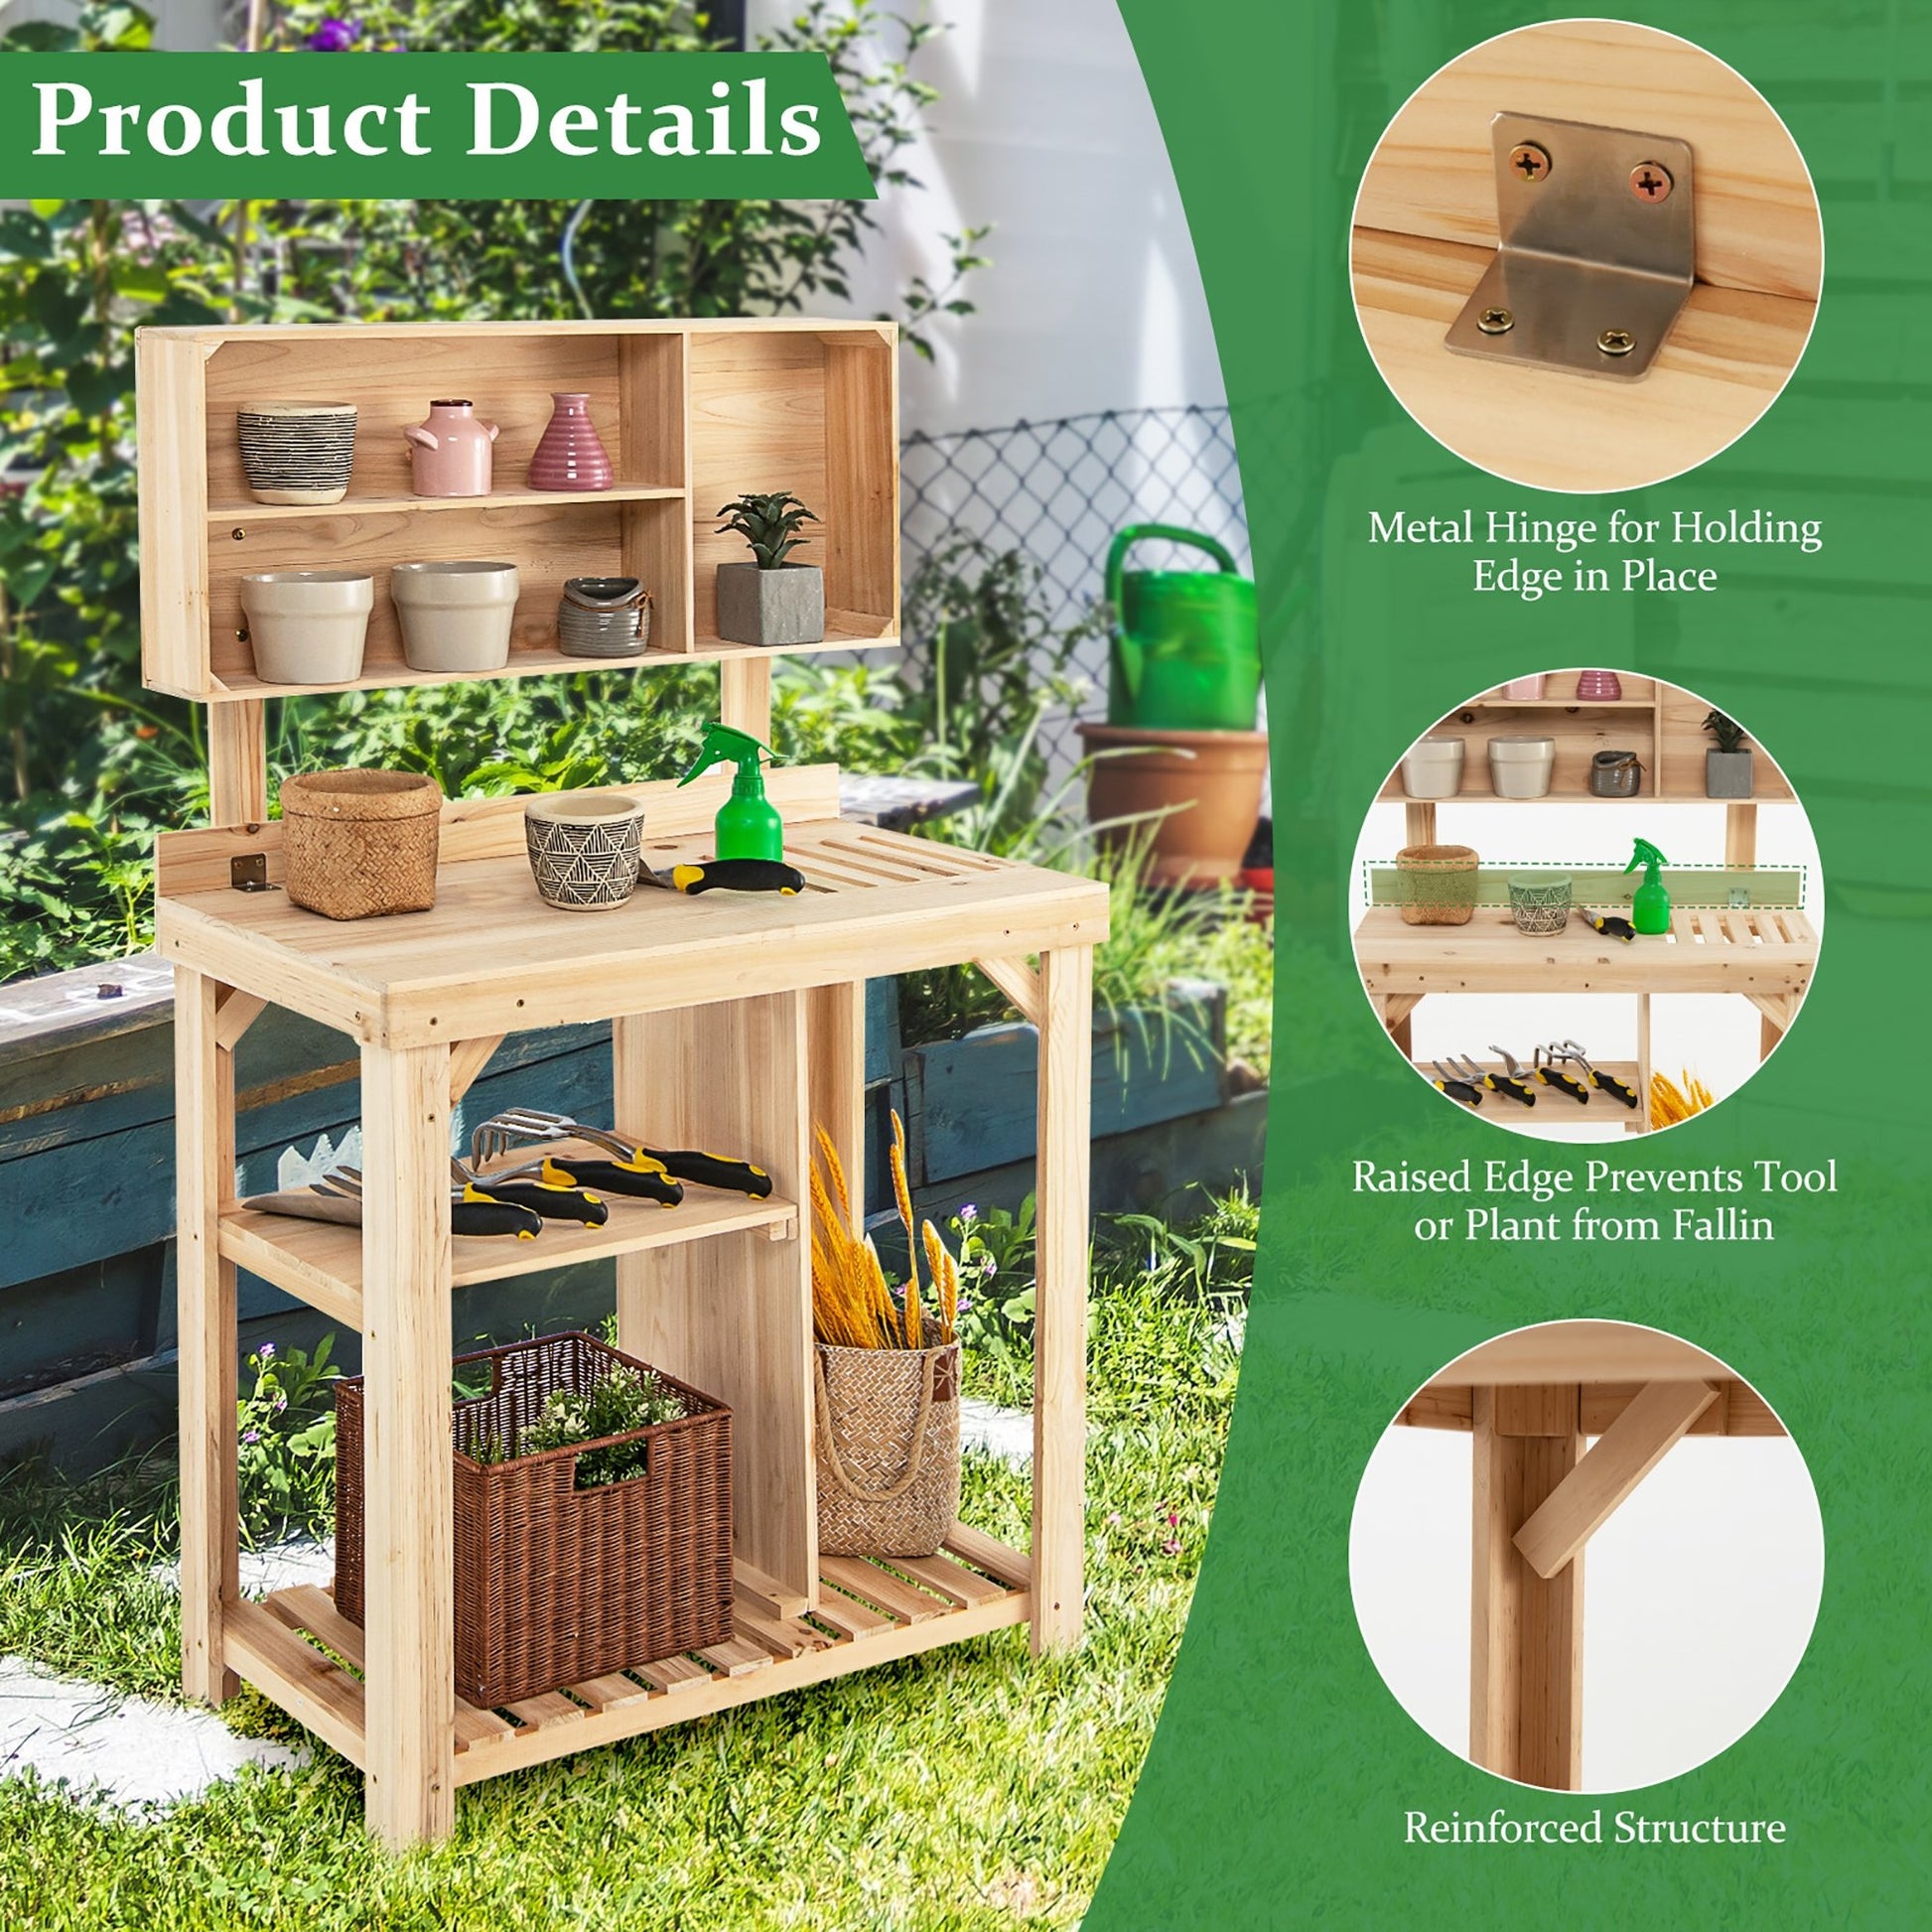 Garden Wooden Potting Table Workstation with Storage Shelf, Natural - Gallery Canada